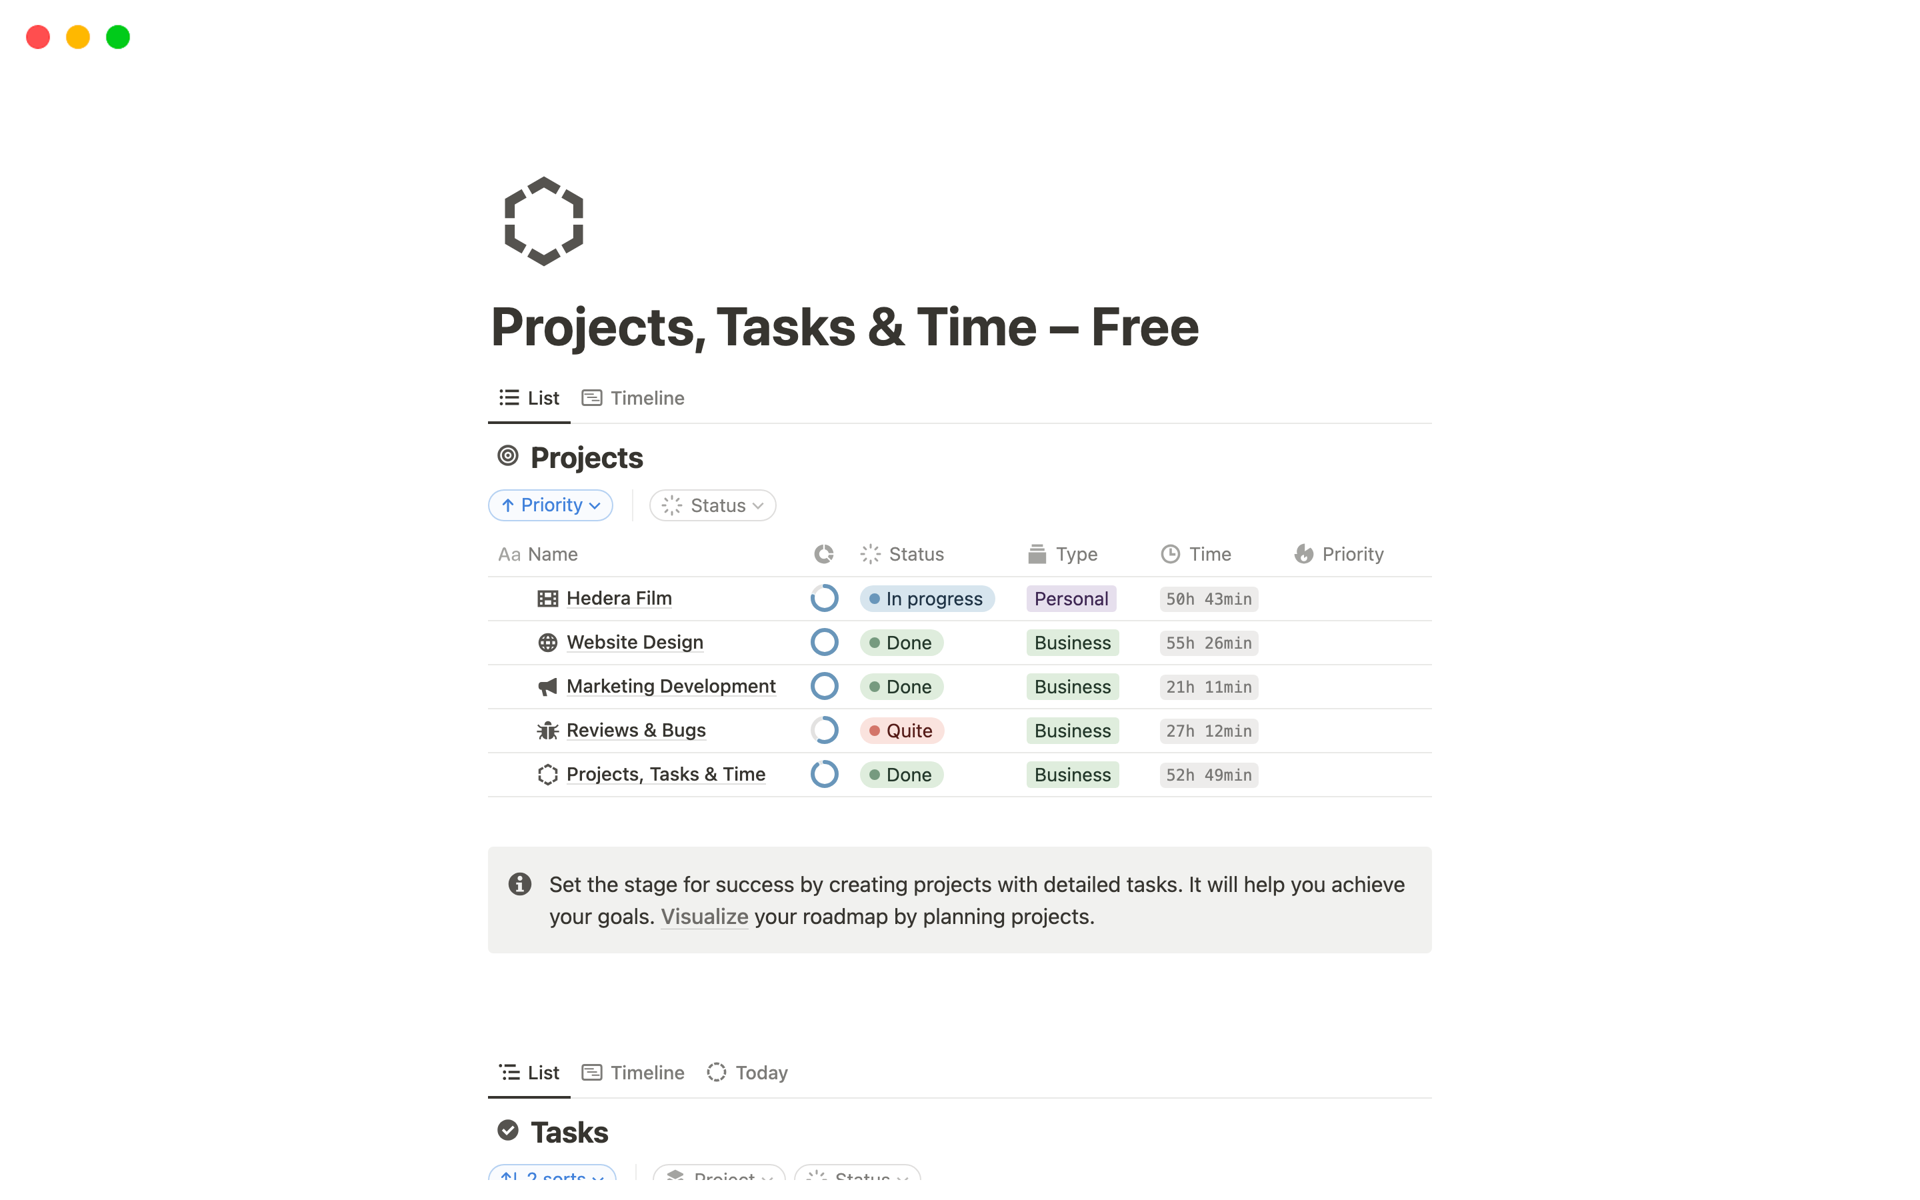 The most comprehensive time tracking inside Notion, with a hierarchical time breakdown for each task and subtask.